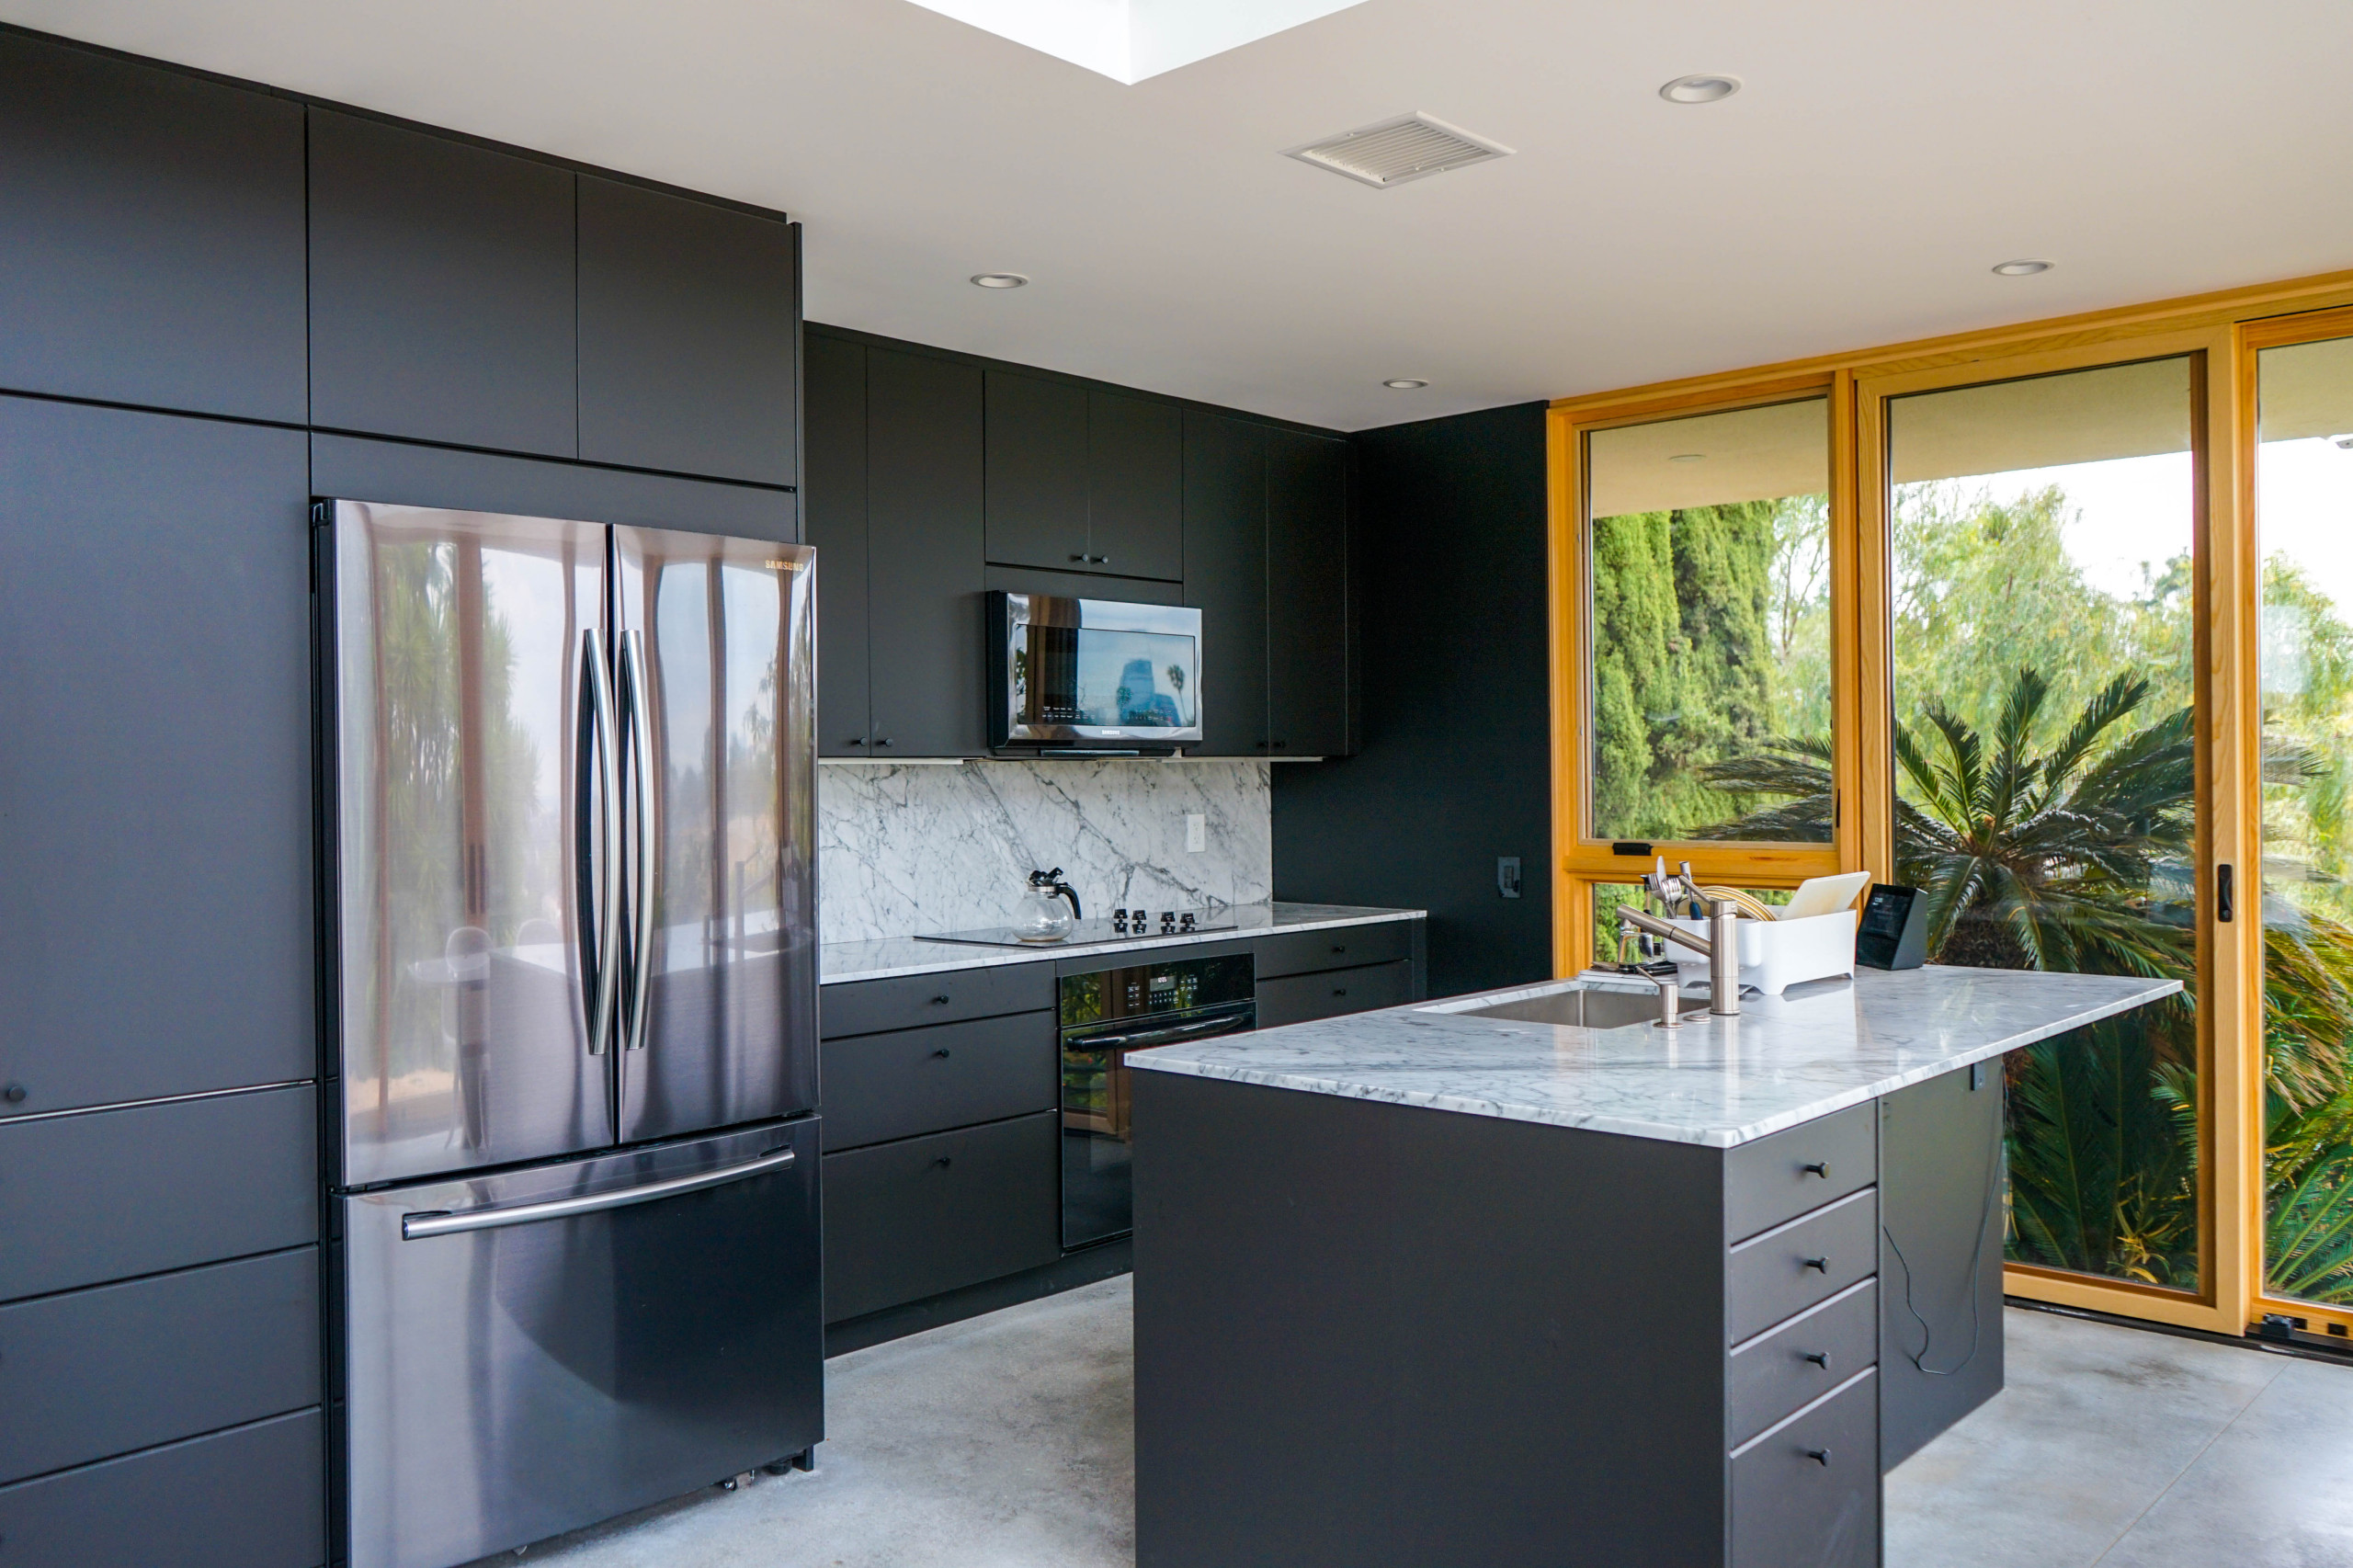 Our Work - Kitchens and Dining / Echo Park, CA